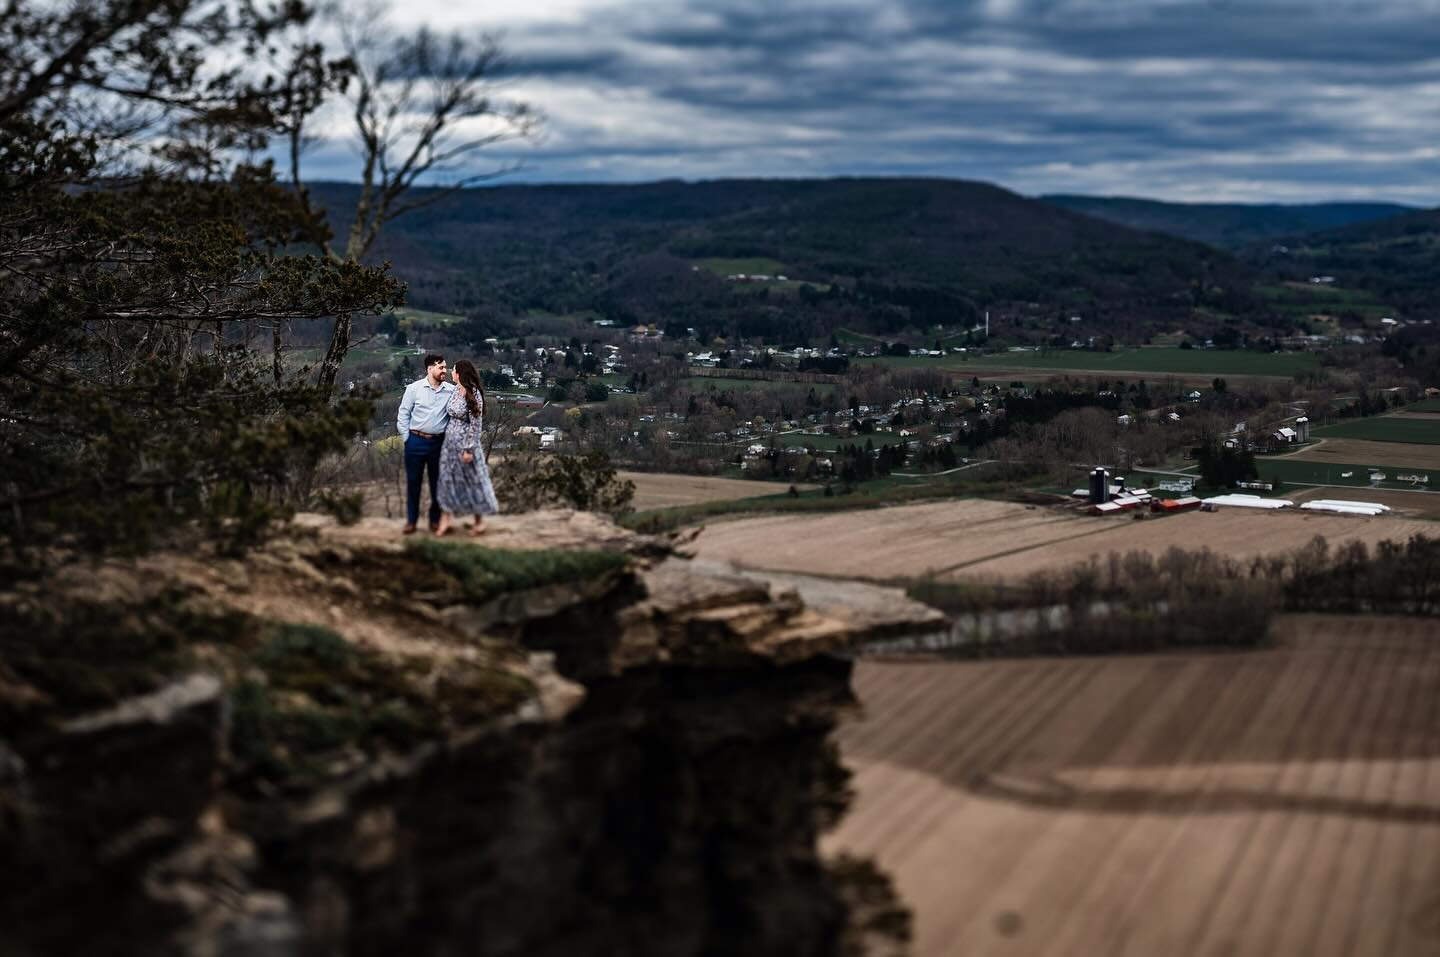 &ldquo;Behind every beautiful shot is a beautiful story! 📸💖 Trekking through mud and marveling at the lovely views of the Schoharie Valley with Carolyn and Evan was an unforgettable experience. Getting to know them better before their big day at Bl